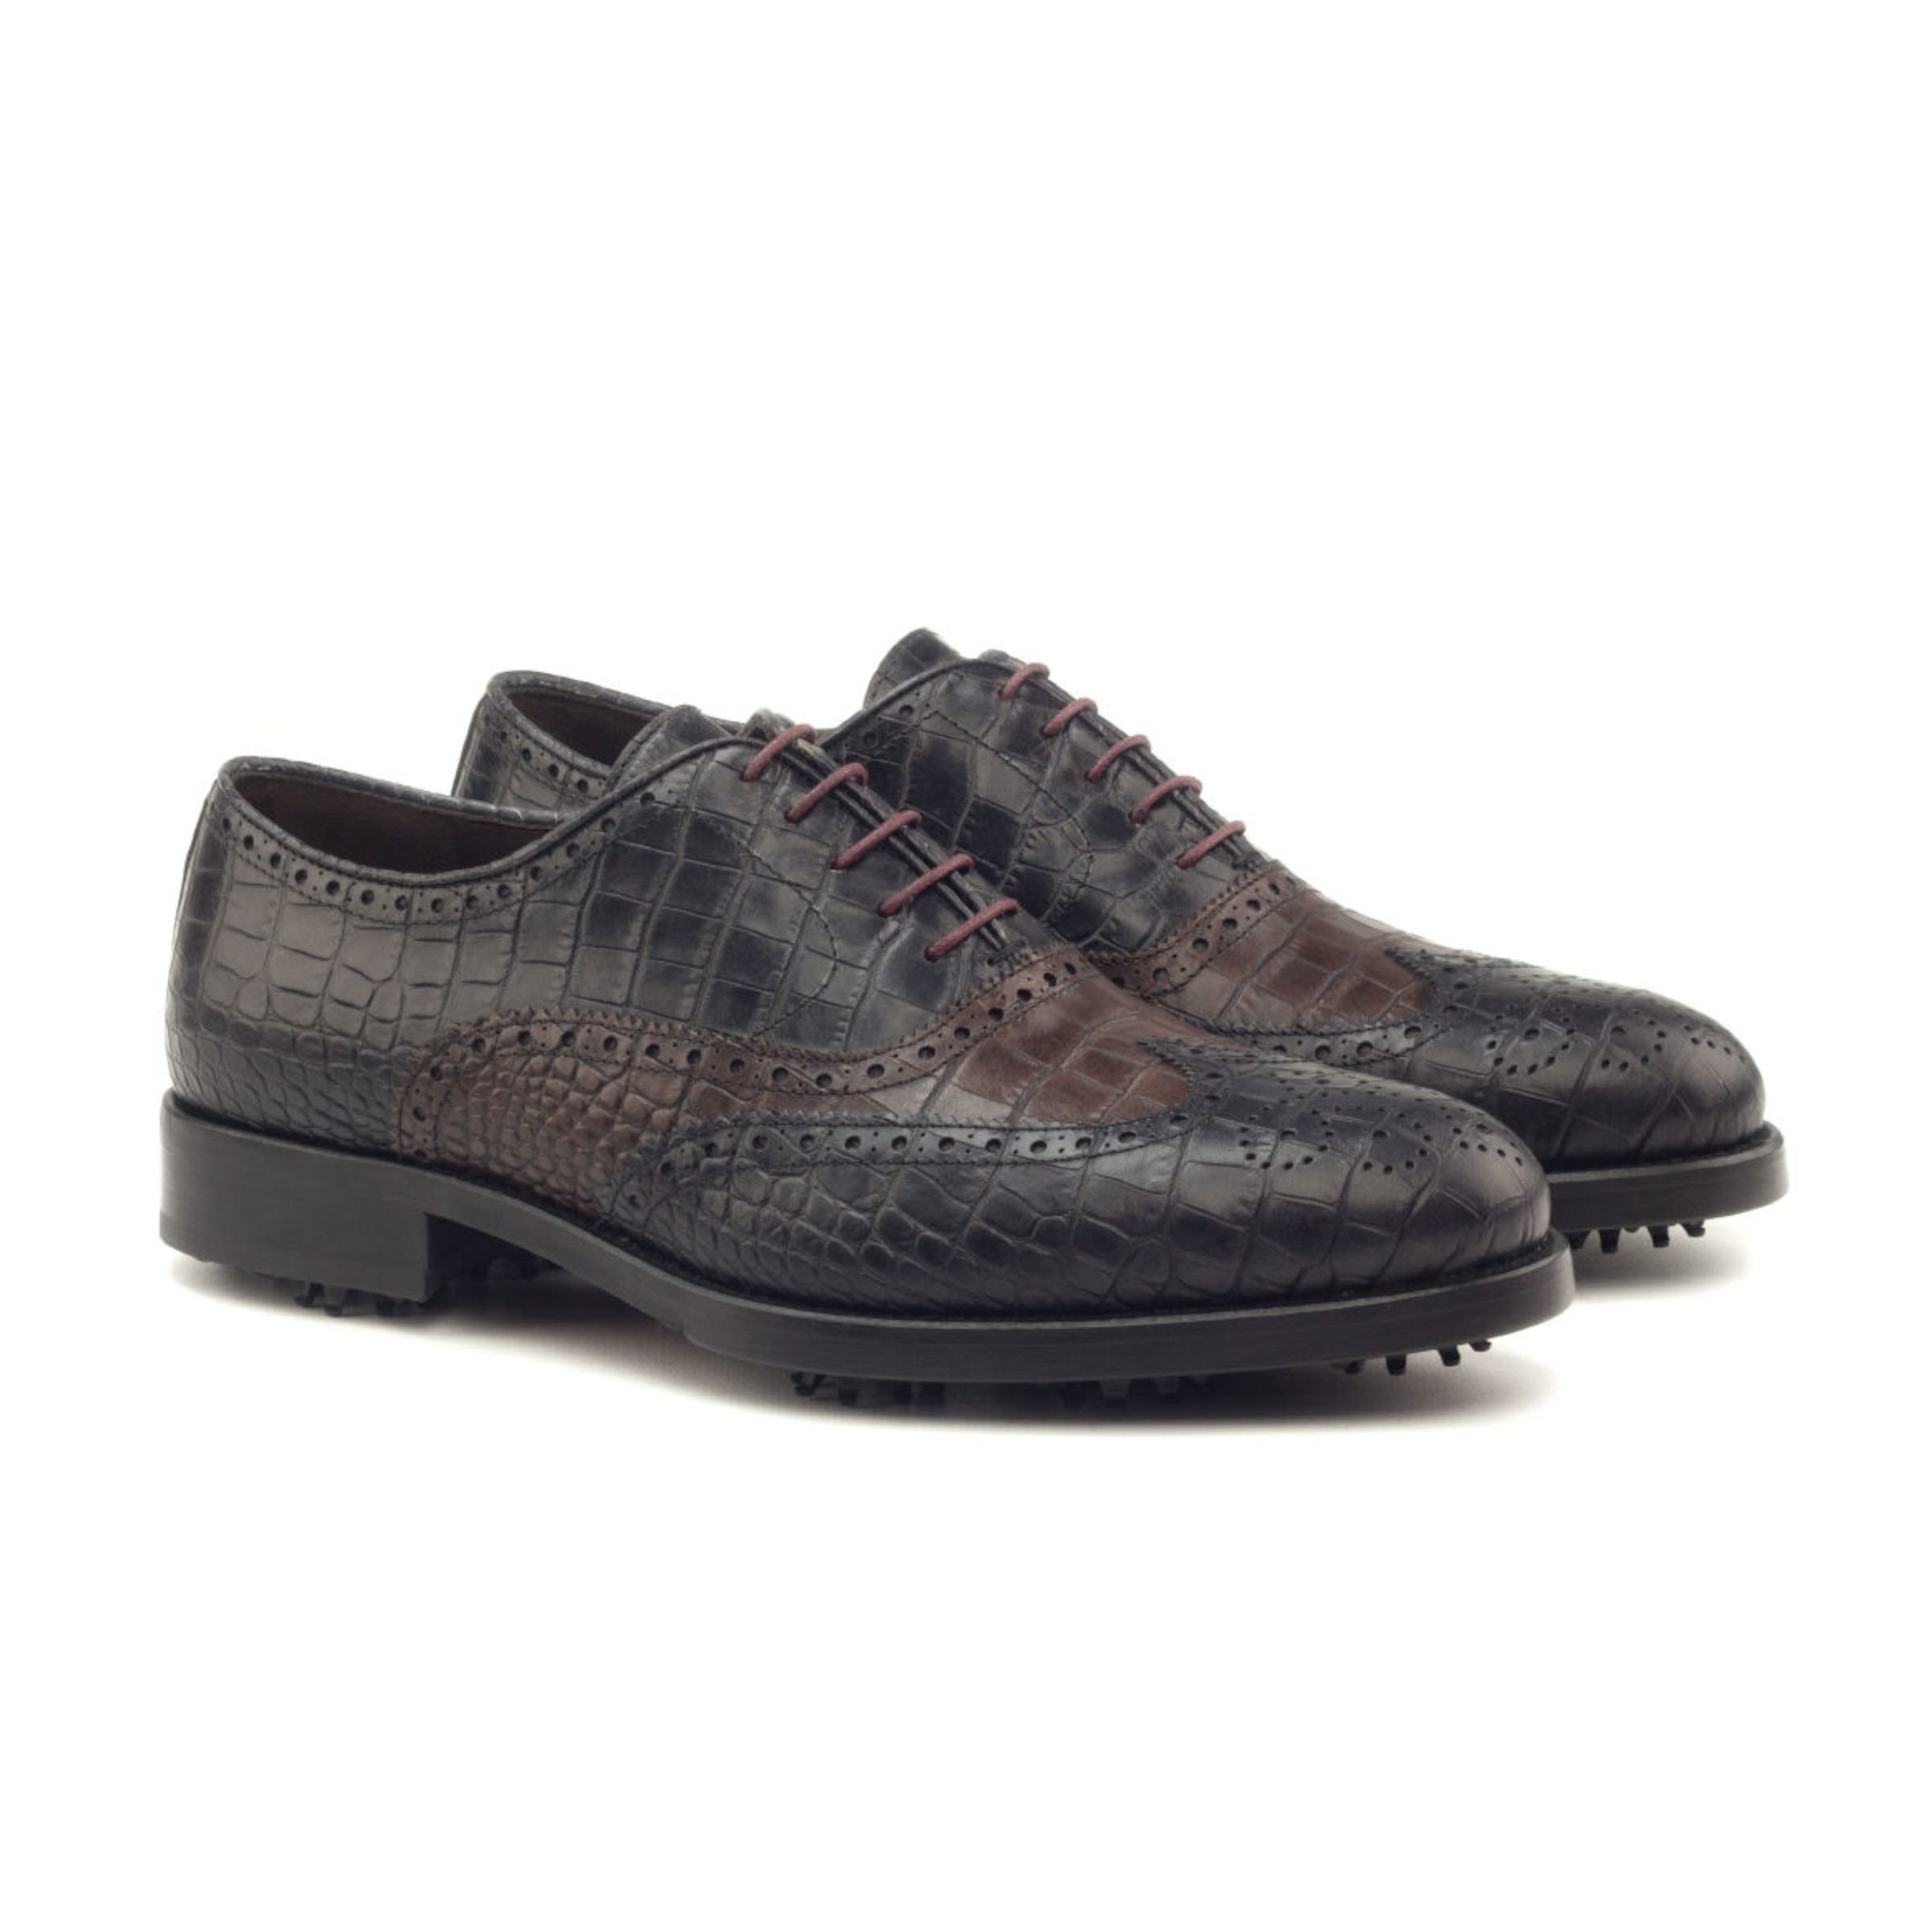 The Brogue Golf Shoe: Mixed Croc. Black painted crocodile, dark brown painted crocodile golf shoes with toe embellishments on a white background